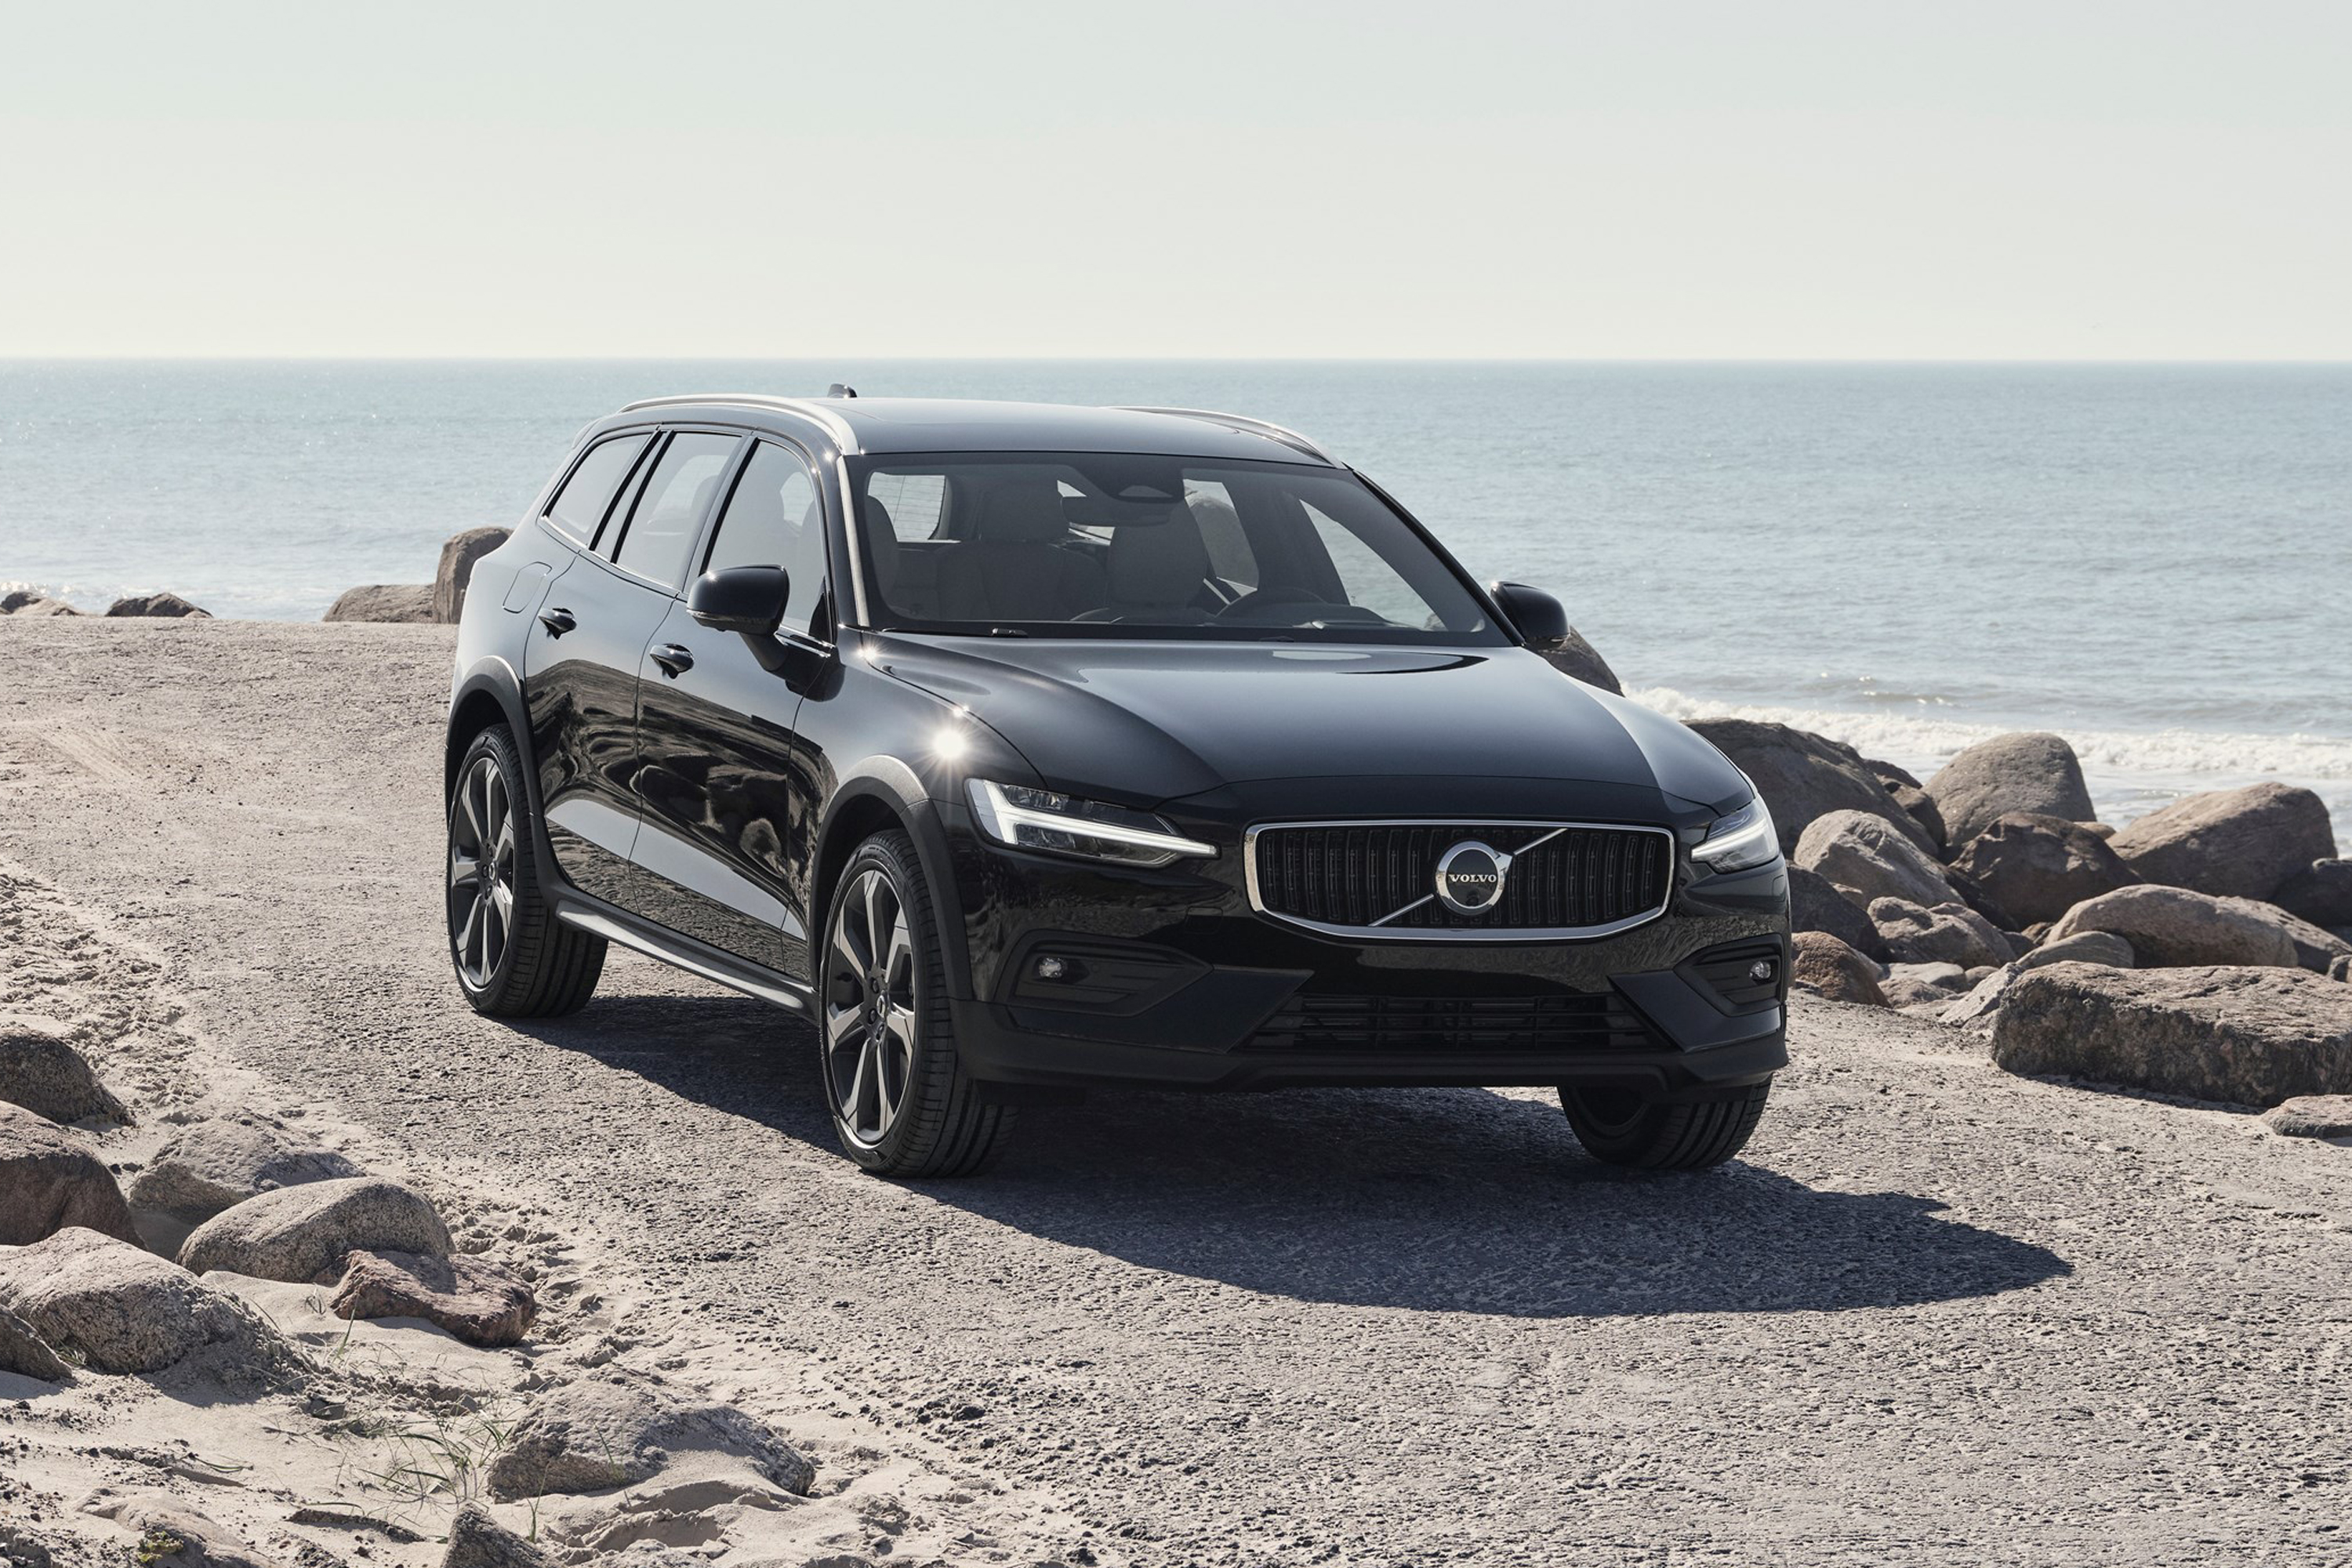 2022 Volvo V60 Cross Country Review: A Luxury All-Weather Wagon